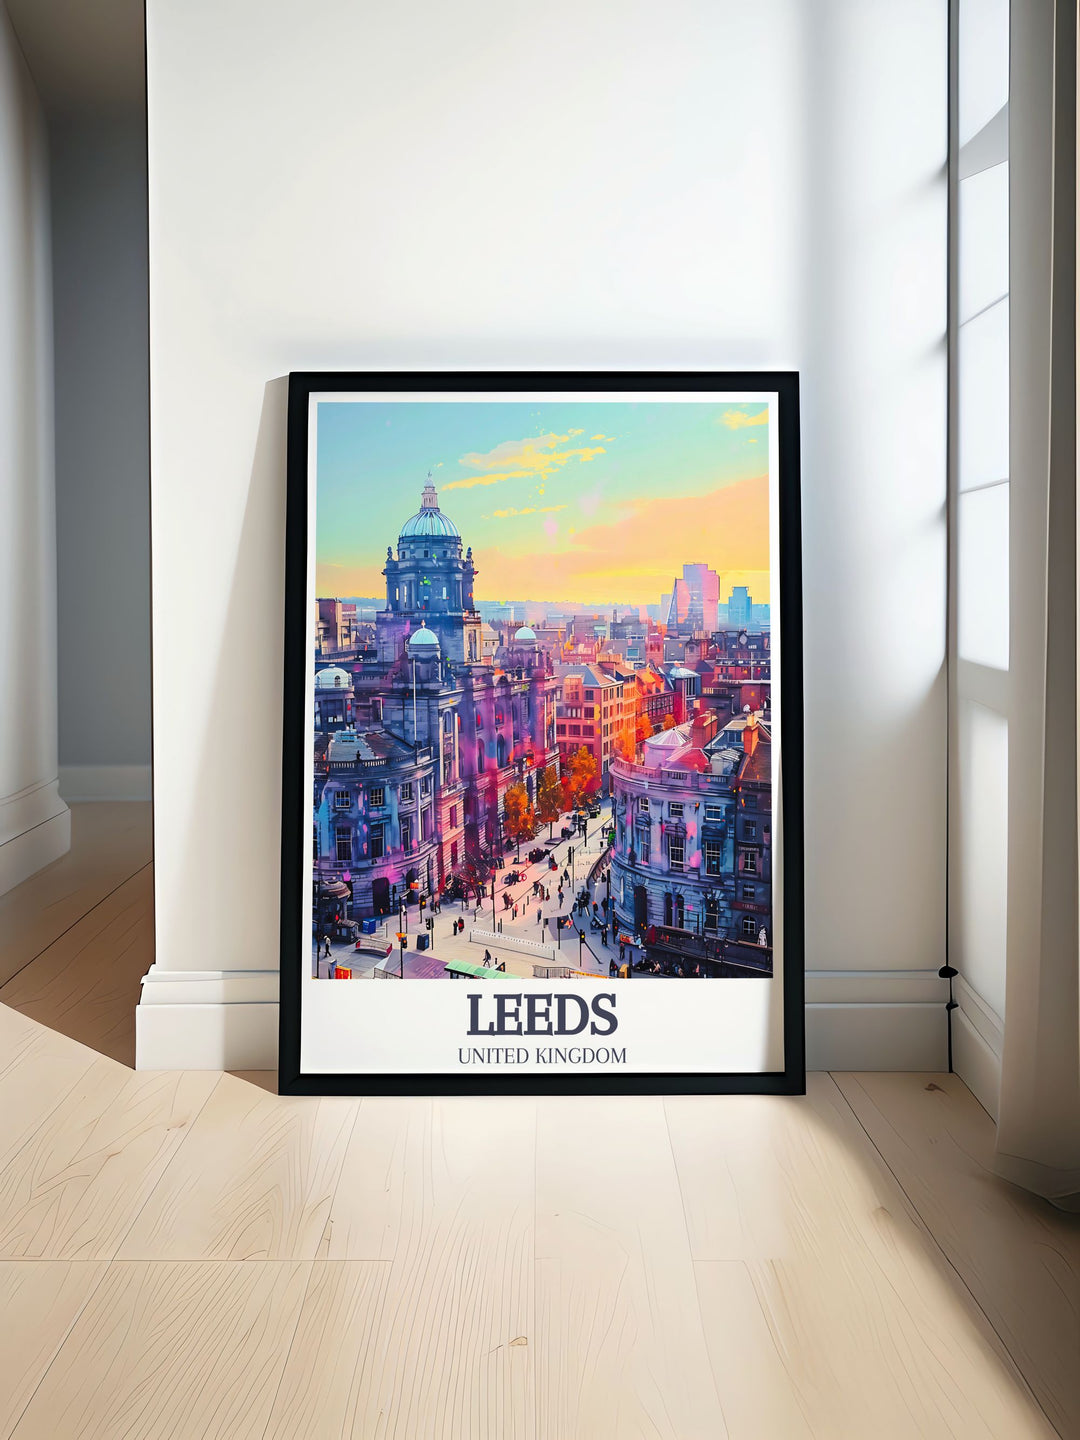 Leeds Corn Exchange and Briggate High Street art print capturing the vibrant architecture and bustling streets of Leeds. Ideal for England travel enthusiasts and those seeking unique England wall decor and Leeds Corn Exchange gifts for special occasions.